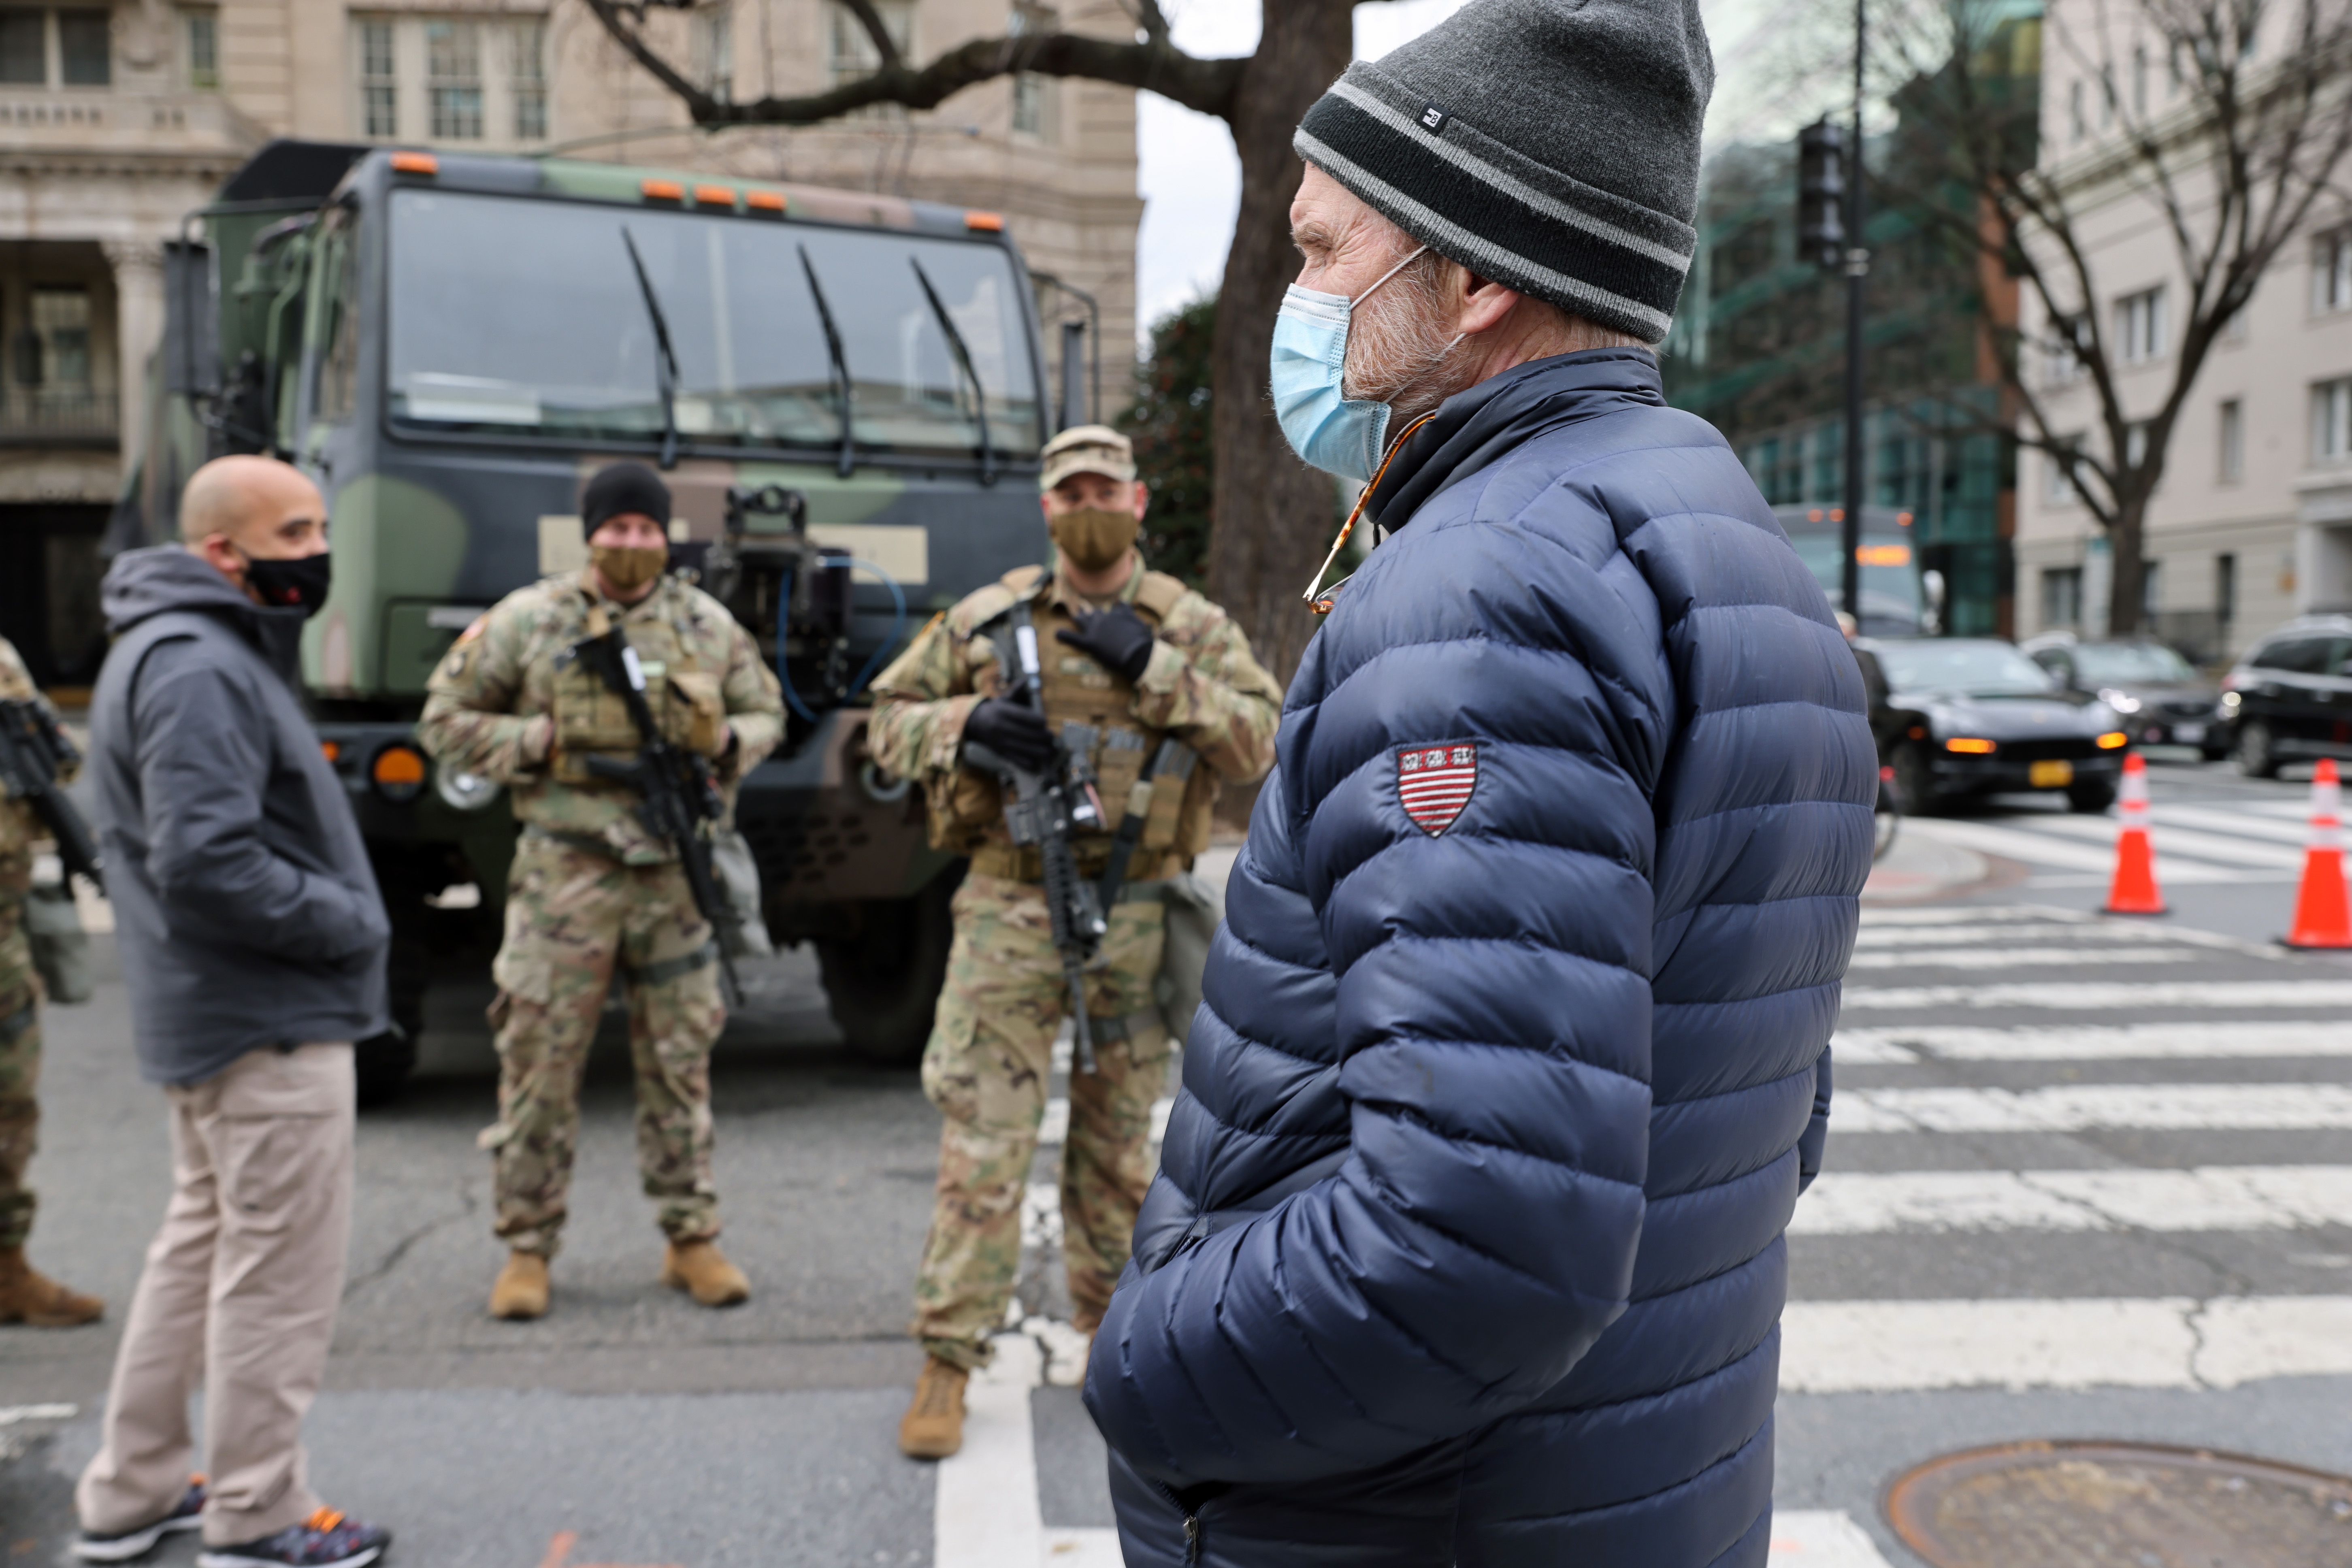 Members of the National Guard stand guard at a street junction in Washington, D.C., on Jan. 16. 